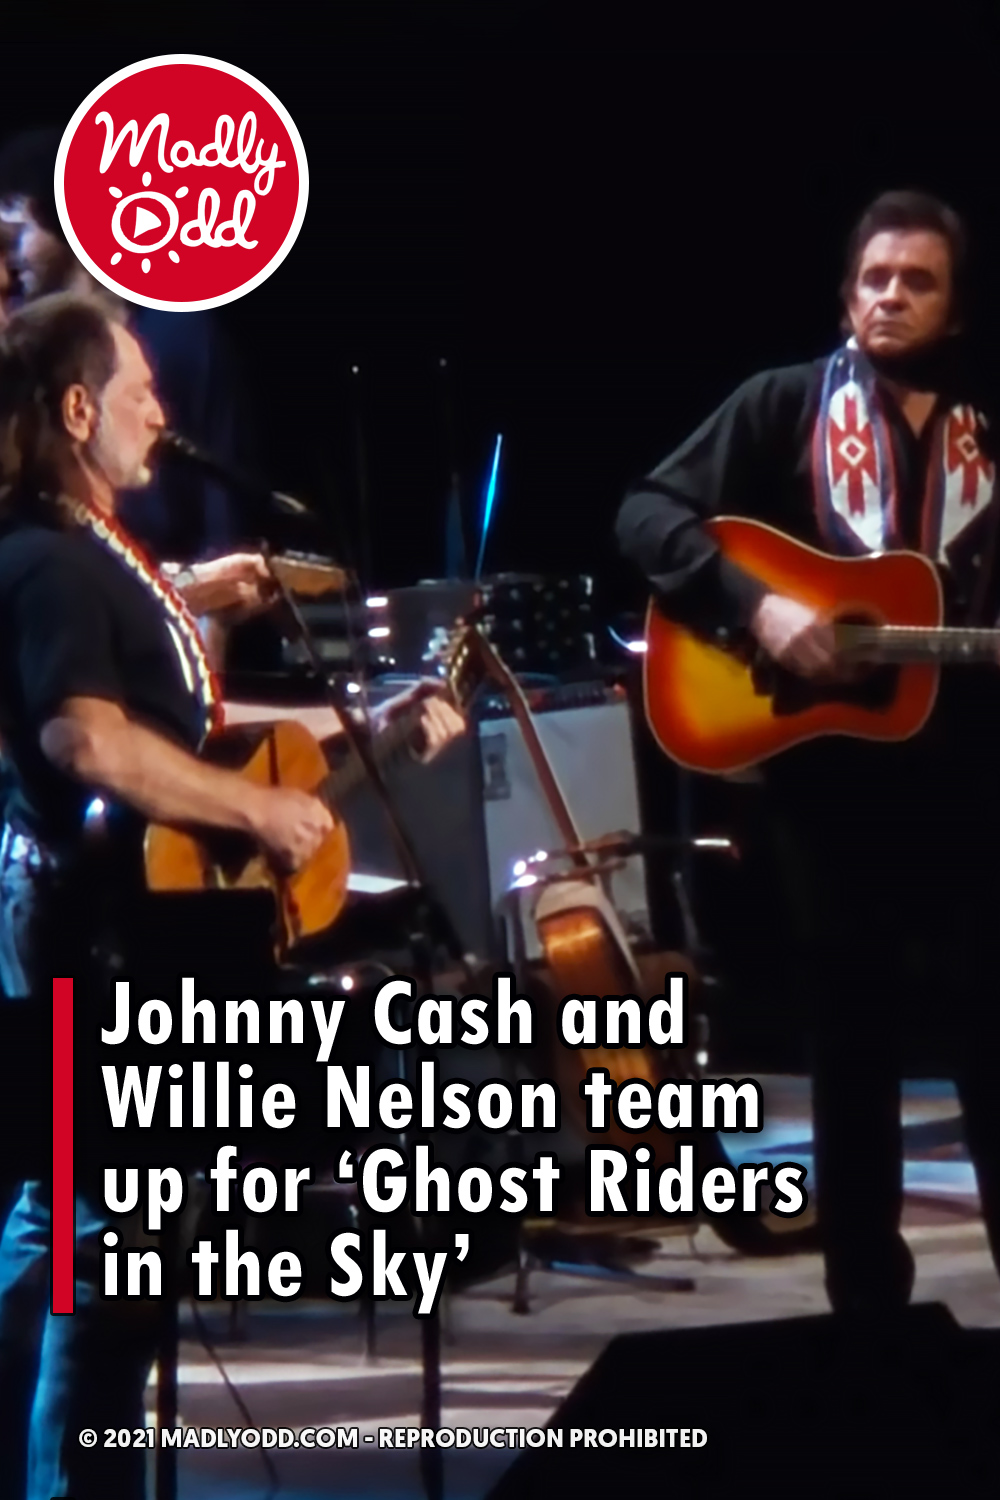 Johnny Cash and Willie Nelson team up for ‘Ghost Riders in the Sky’